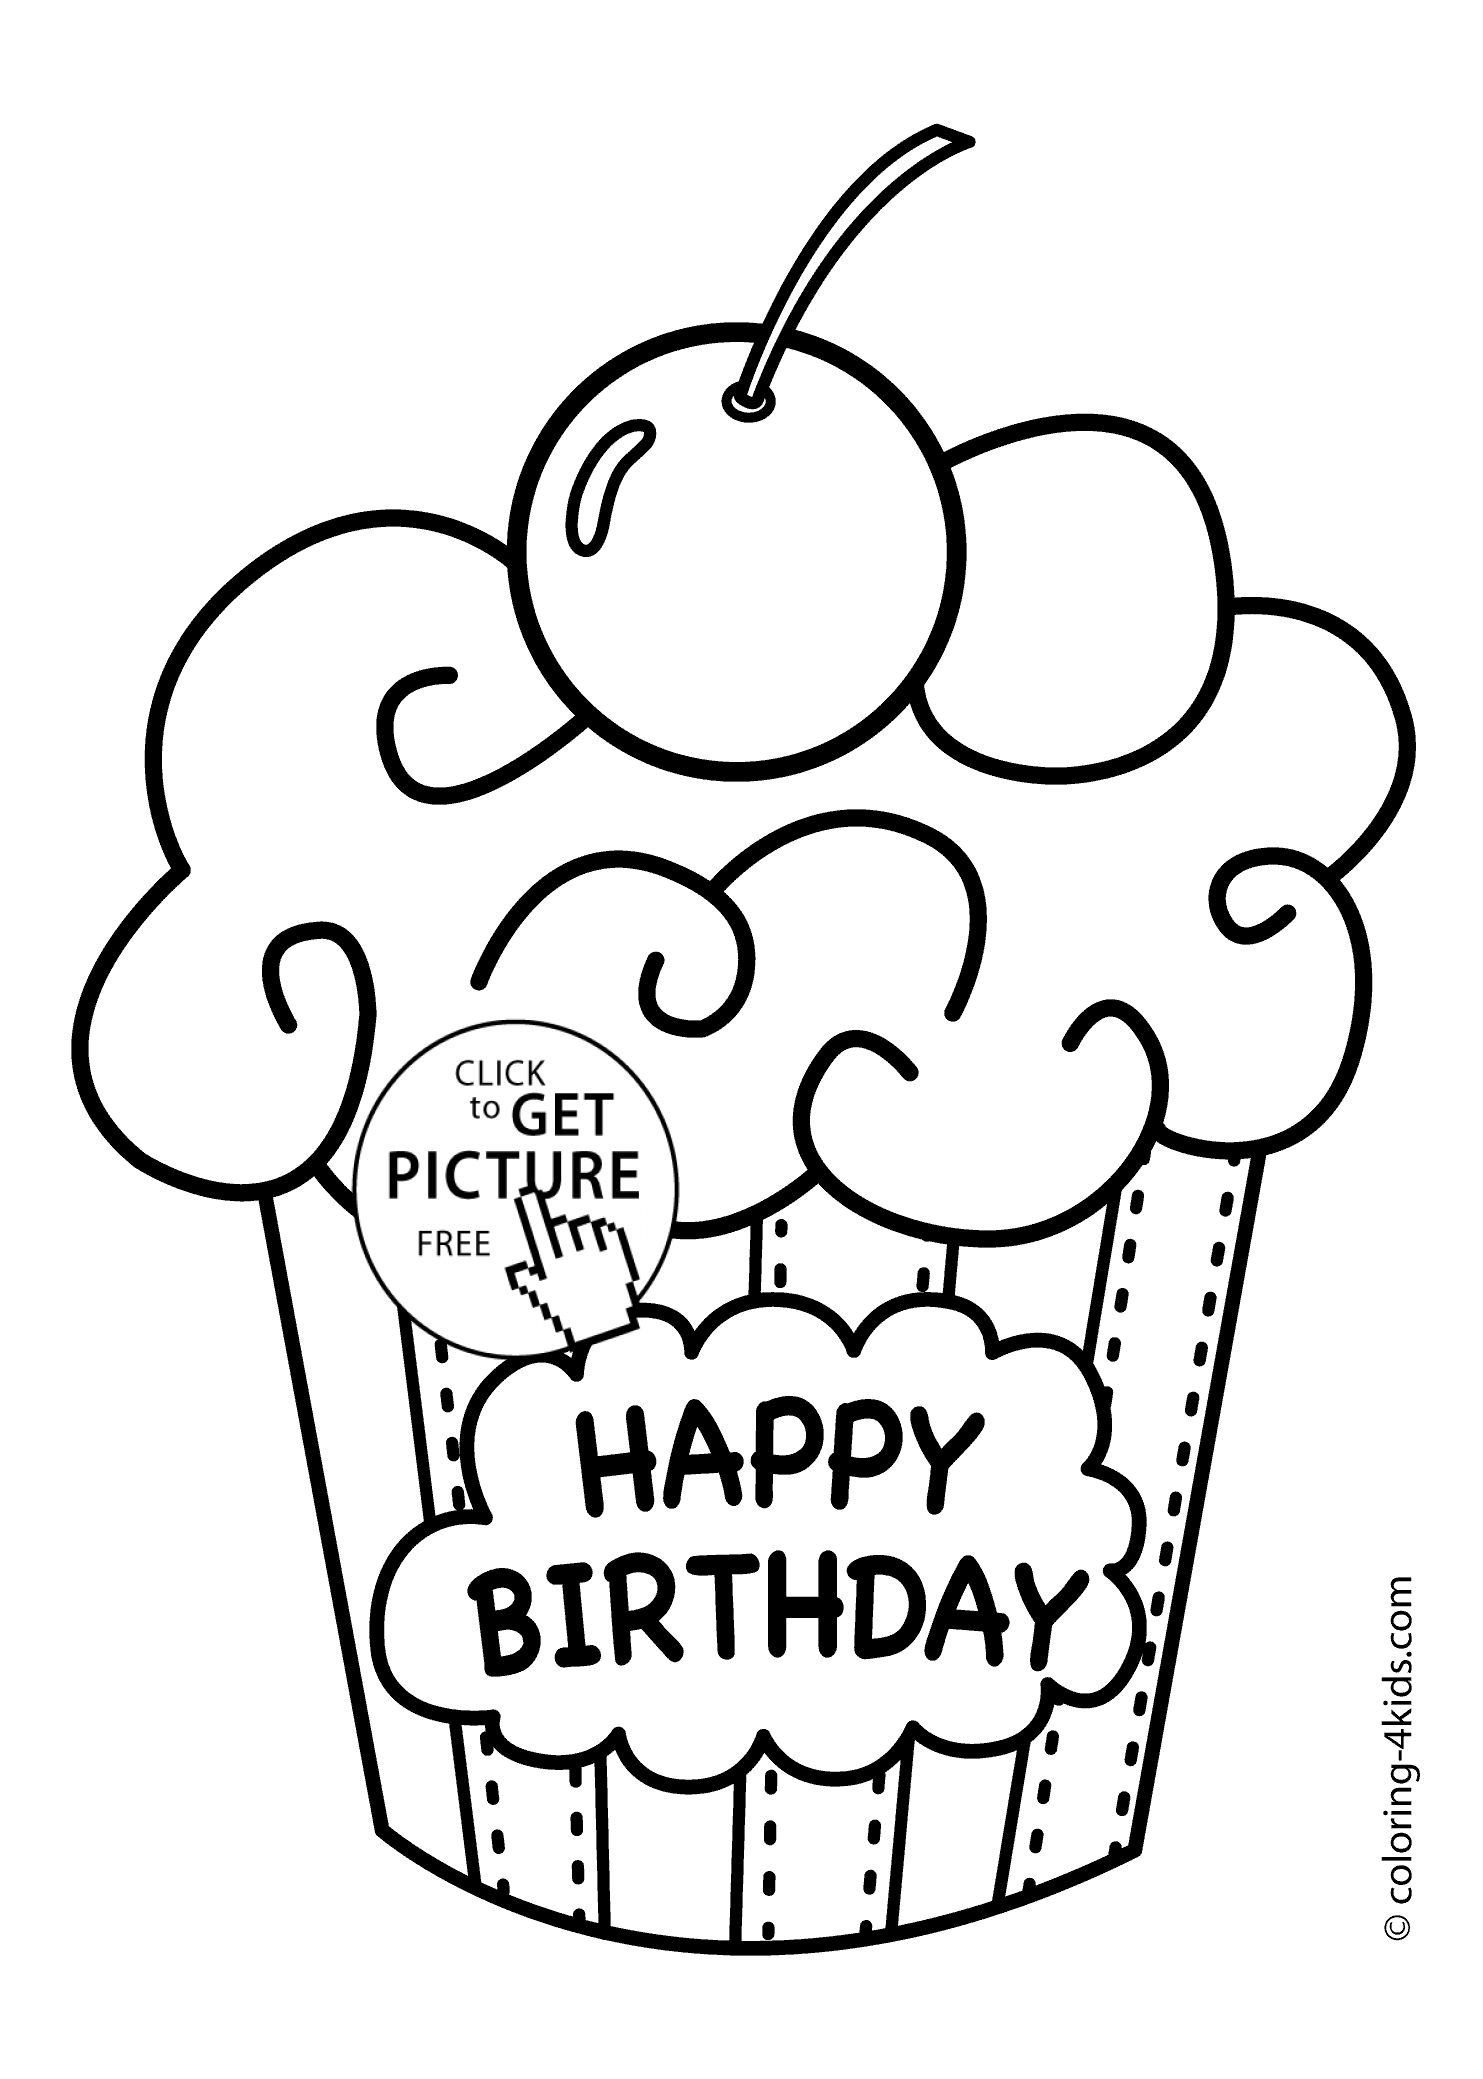 Happy Birthday Coloring Pages To Print Coloring Pages Birthday Coloring Pages For Kids Party Cake Free